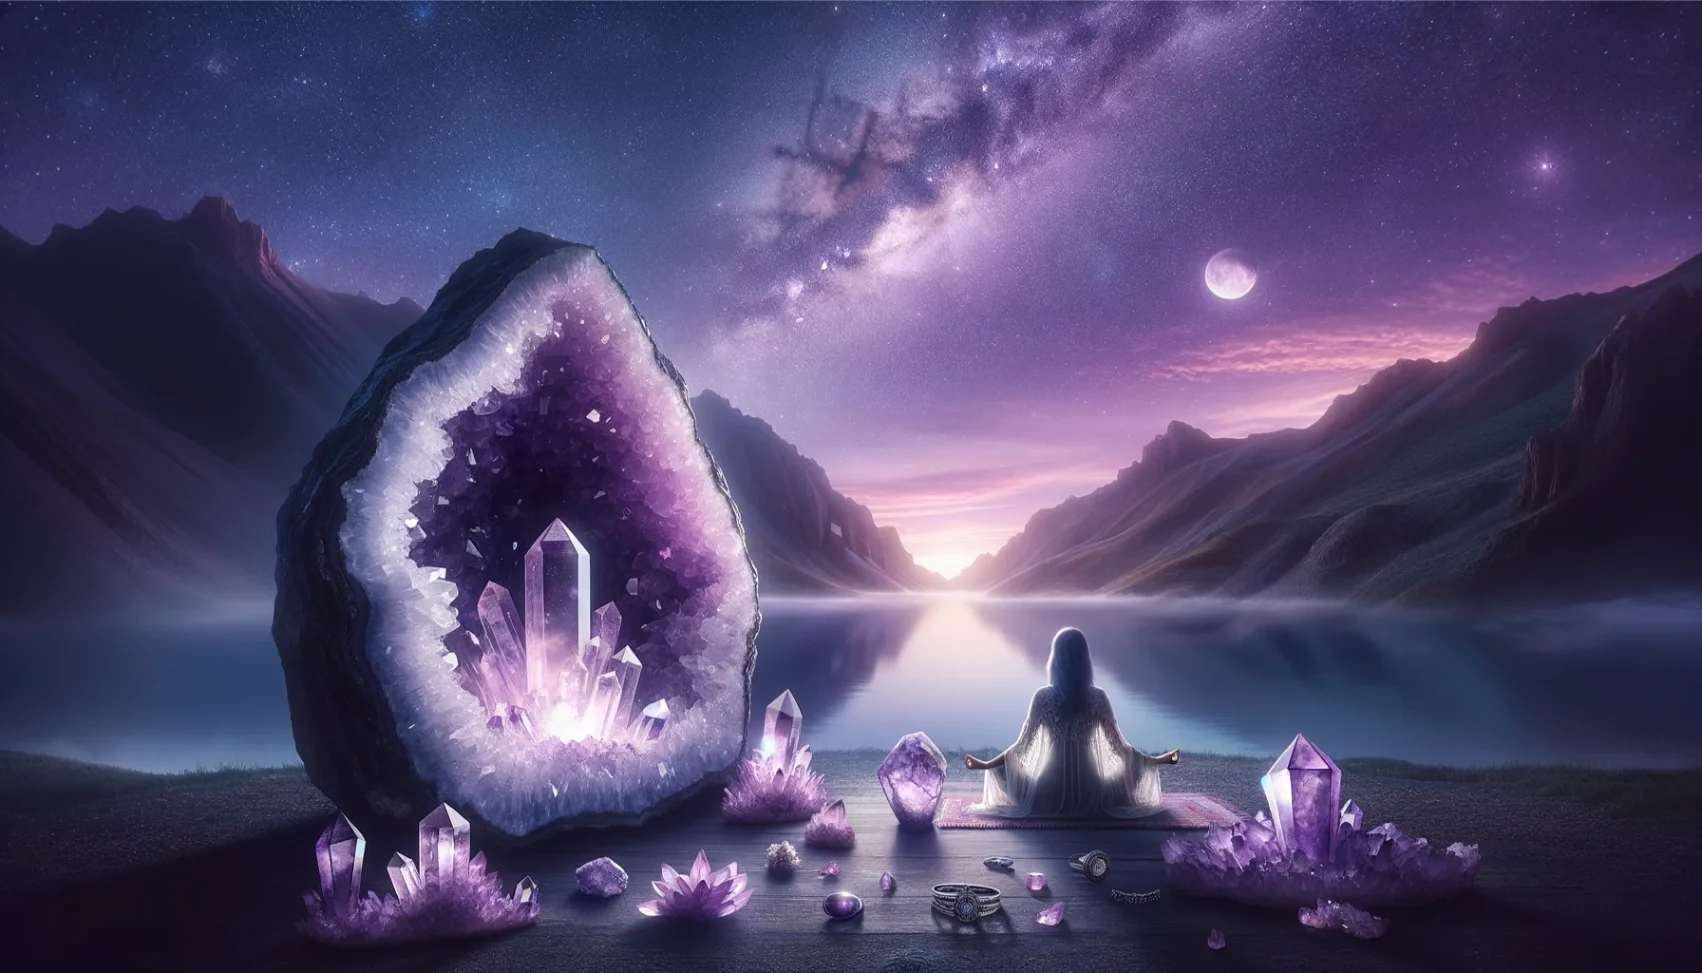 Decoding the Meaning of Amethyst Dreams